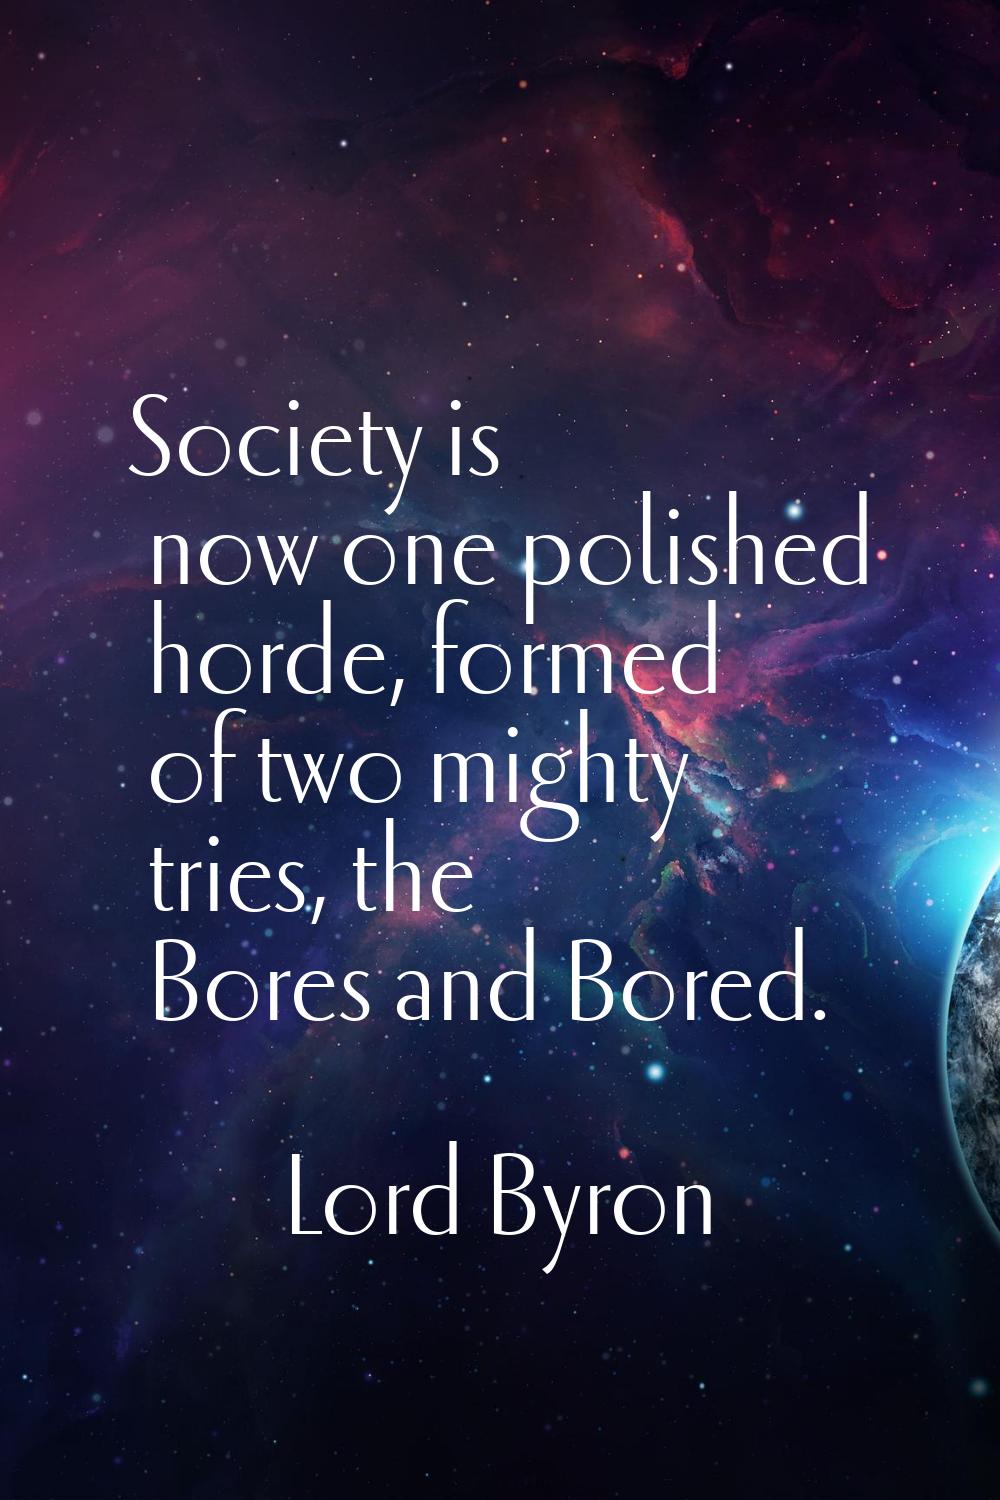 Society is now one polished horde, formed of two mighty tries, the Bores and Bored.